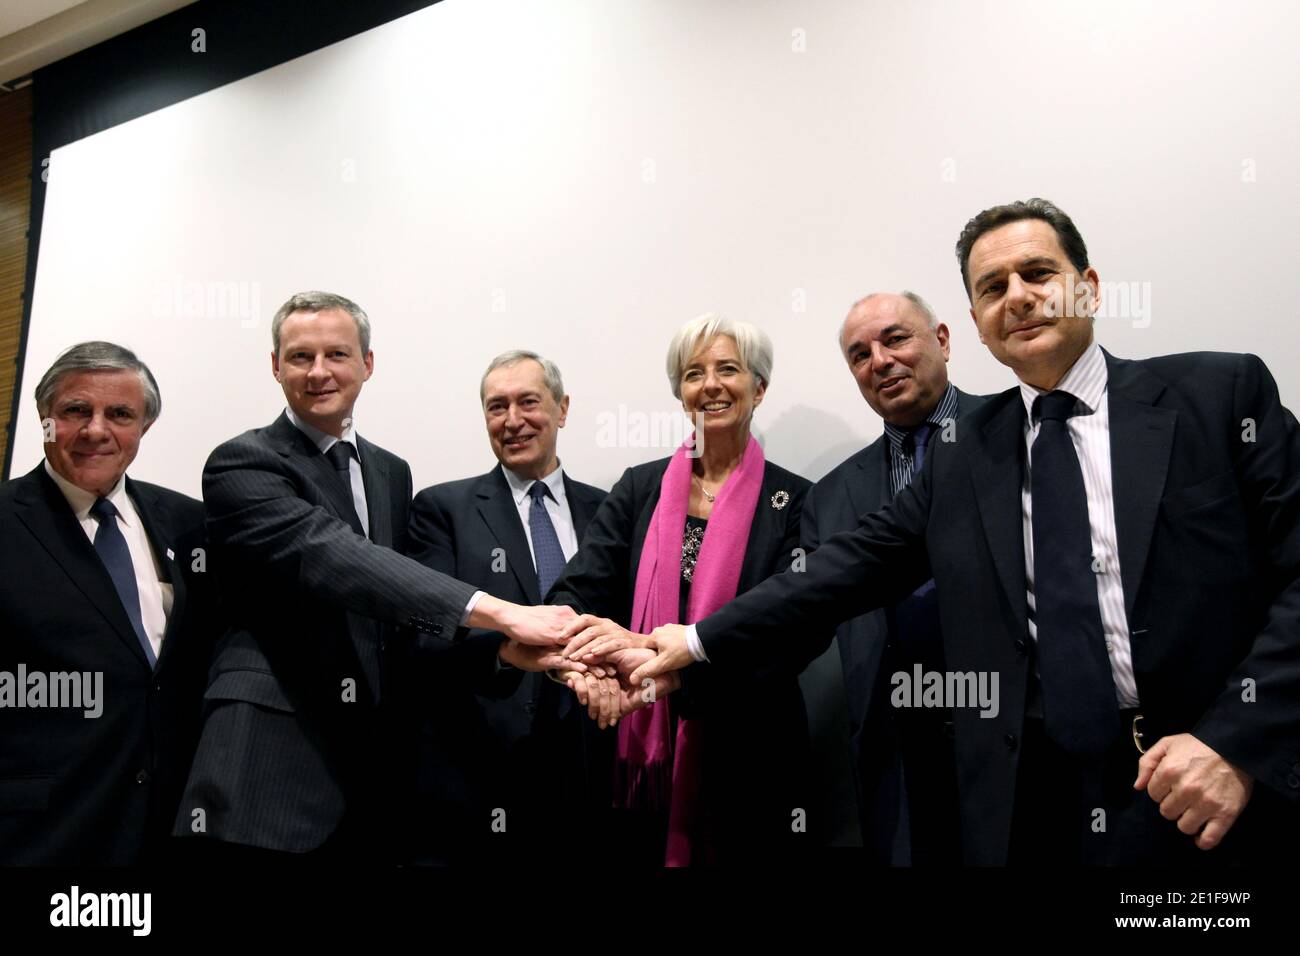 French Economy Minister Christine Lagarde, French Minister for Industry,  Energy and the Digital Economy Eric Besson, French minister for  agriculture, Bruno Le Maire, Chairman and CEO of Groupe La Poste Jean-Paul  Bailly,